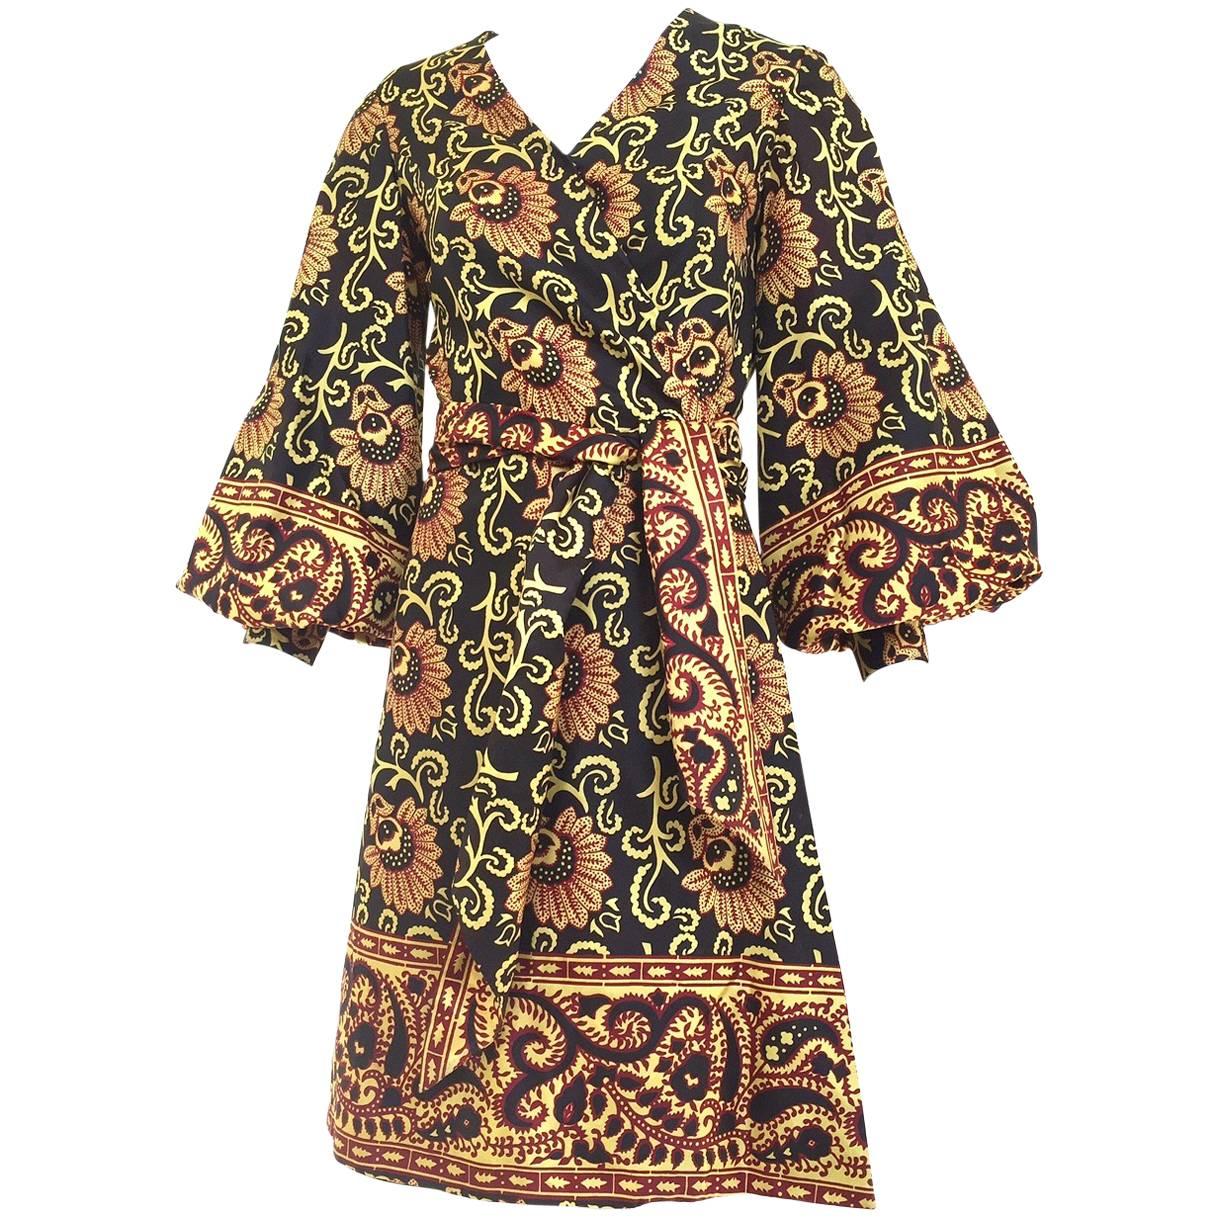 1960s Multi Color Botanical Print Rayon Wrap Dress with Dramatic Sleeves